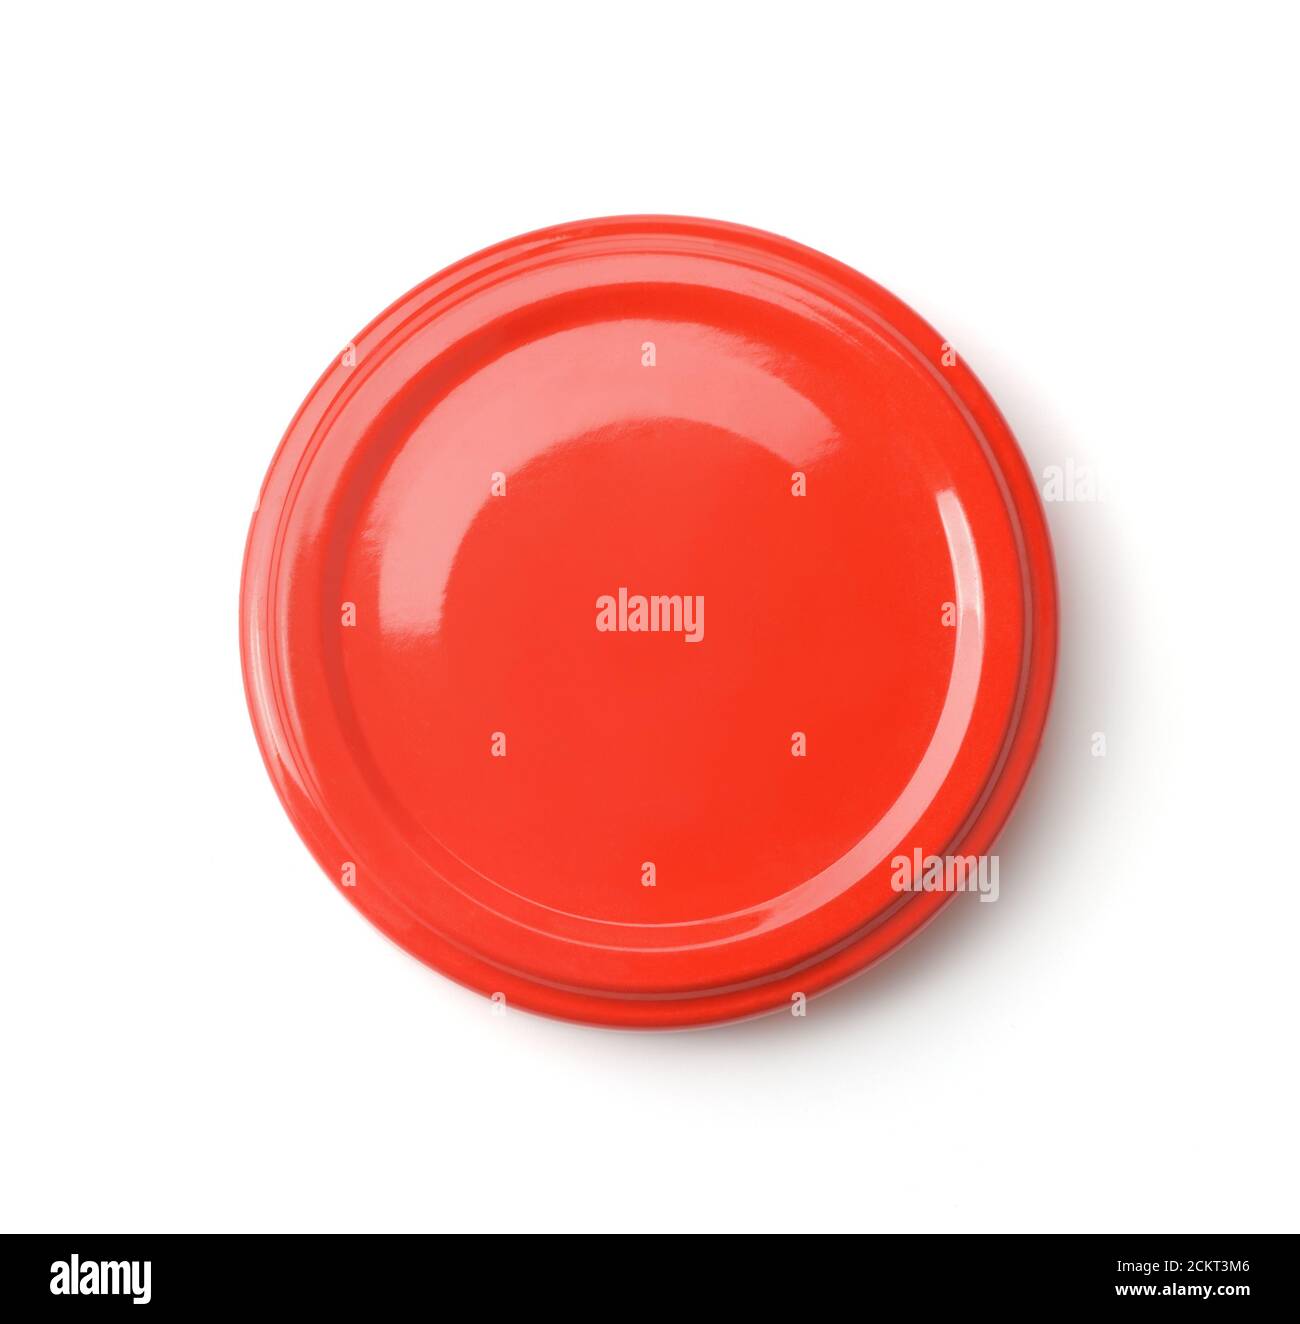 Top view of red blank jar lid isolated on white Stock Photo